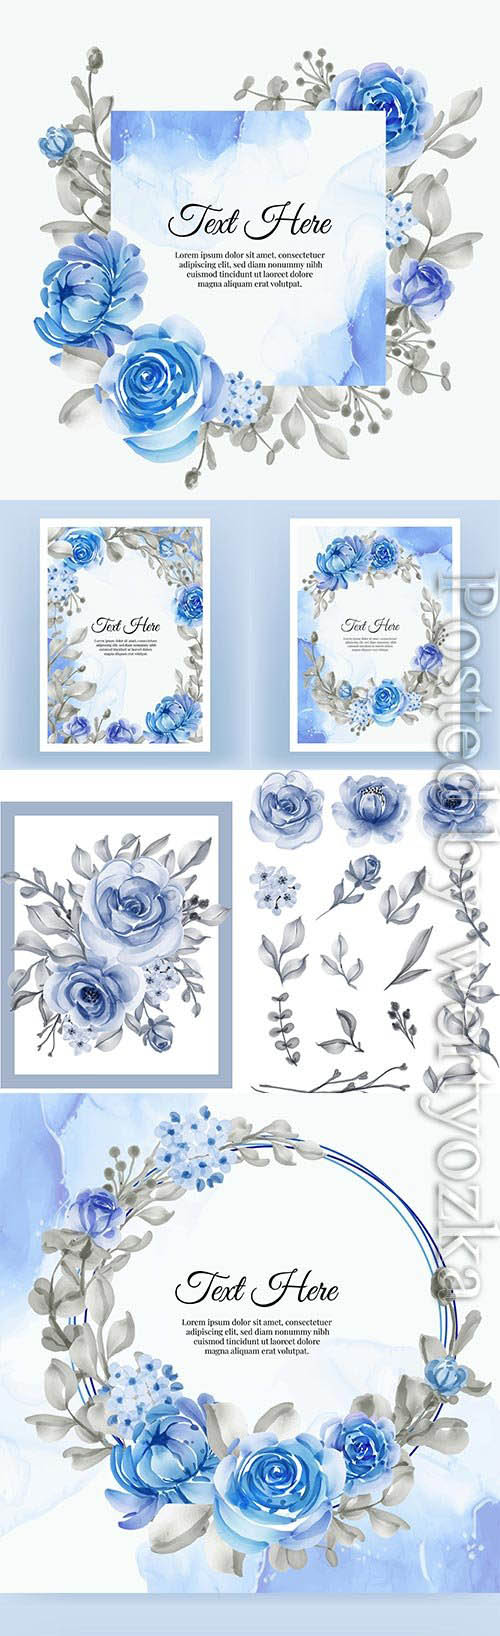 Watercolor illustration rose and leaf navy blue isolated clipart